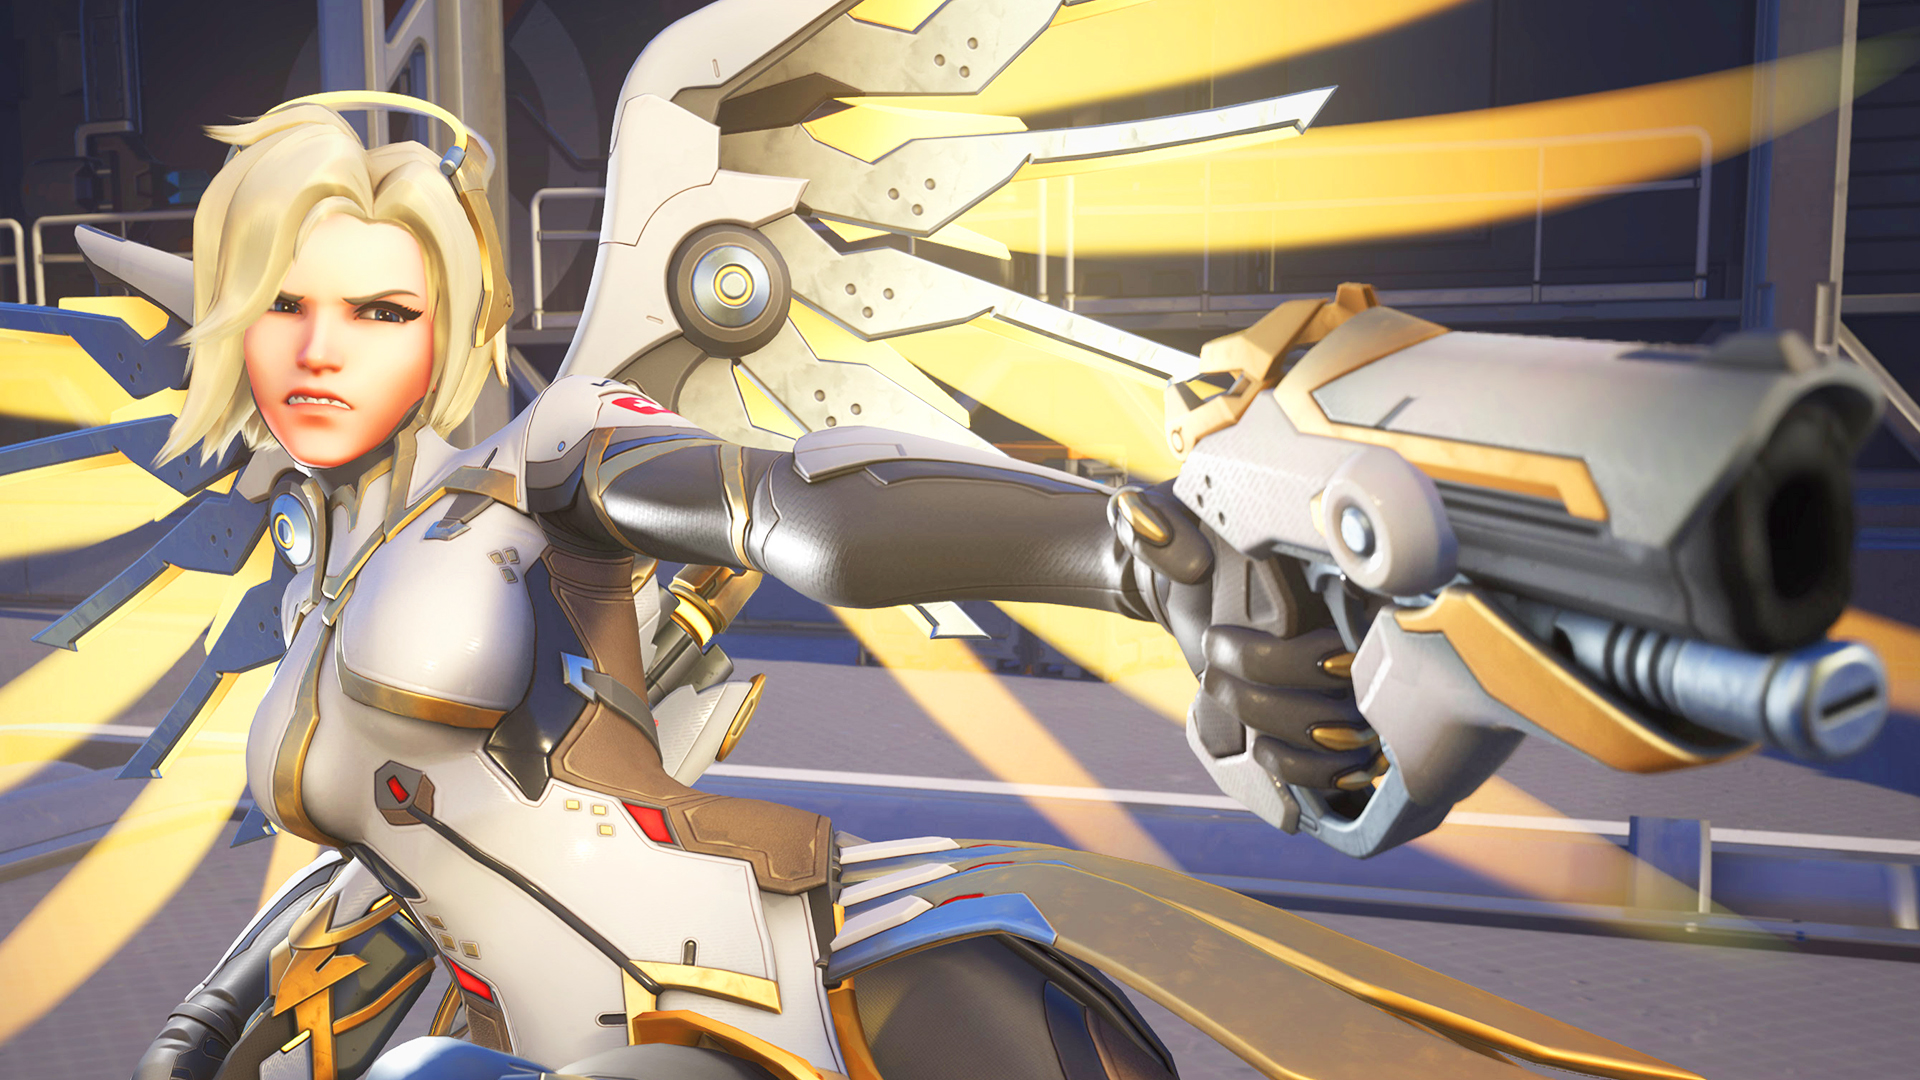 ‘Aiming is optional now’: Overwatch 2’s bigger bullets divide players as they adjust to Blizzard’s season 9 rework